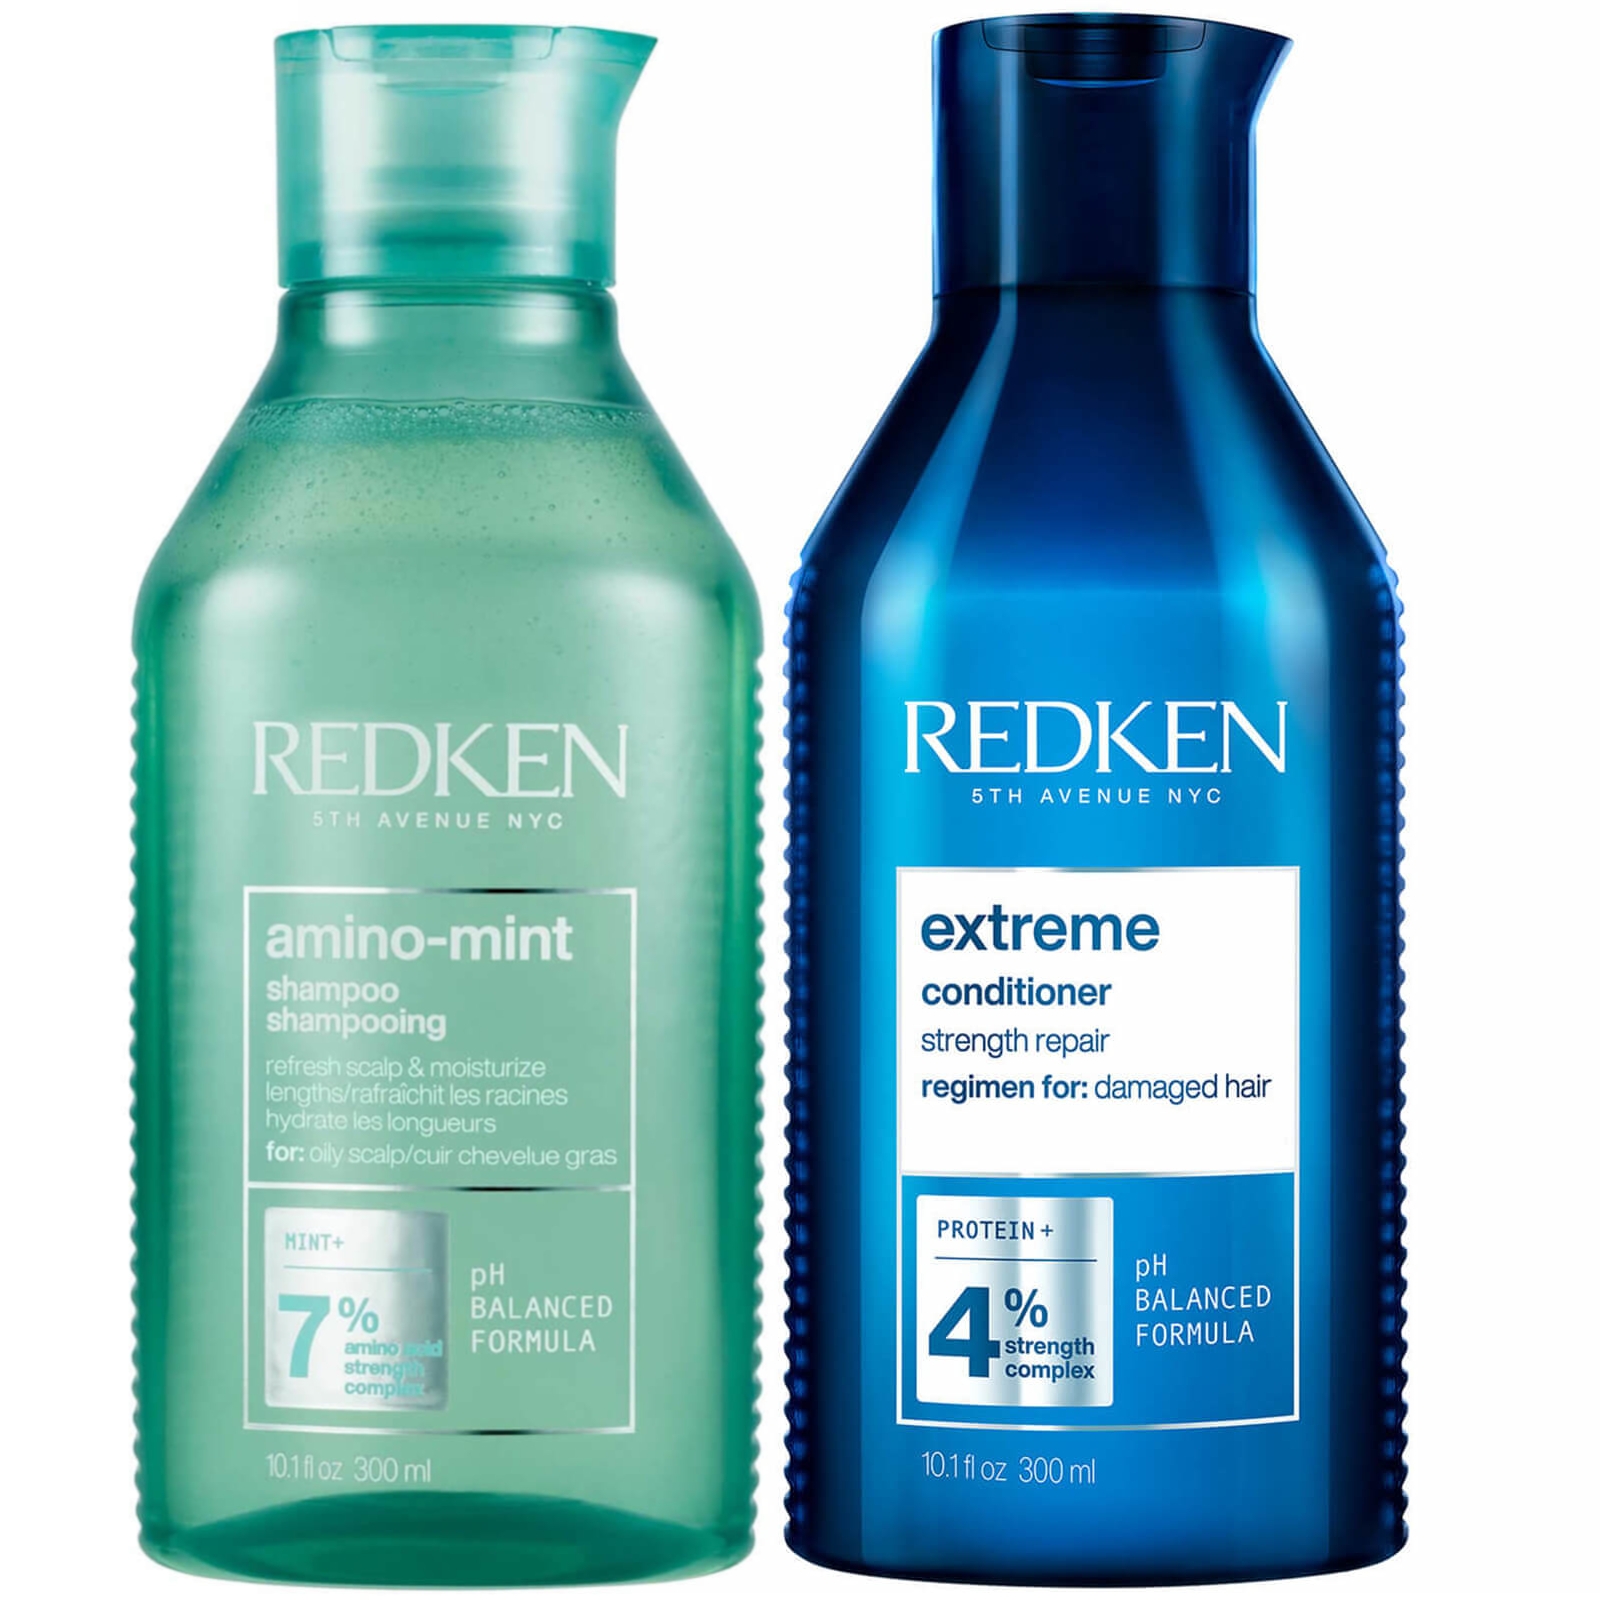 Redken Amino Mint Scalp Cleansing for Greasy Hair Shampoo and Extreme Damage Repair Conditioner Bundle von Redken